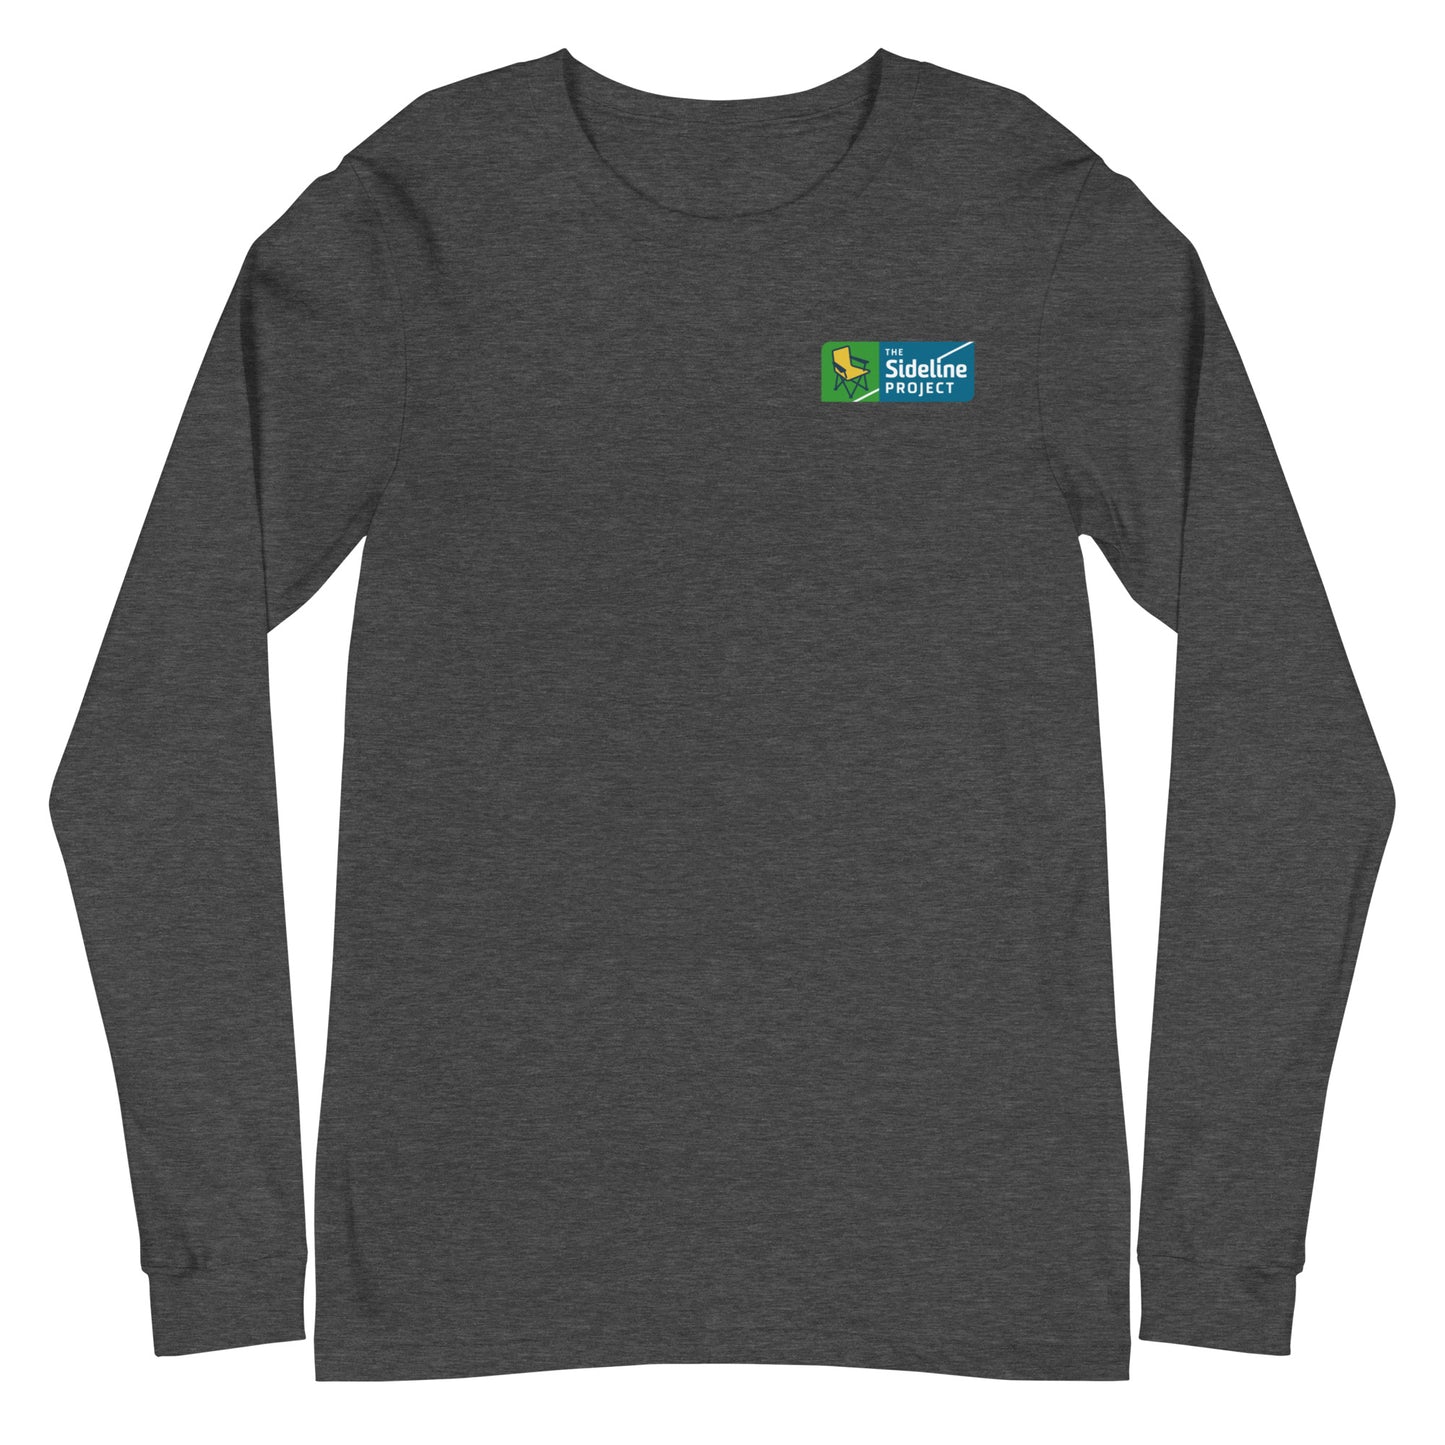 The Sideline Project Unisex Long Sleeve T-Shirt